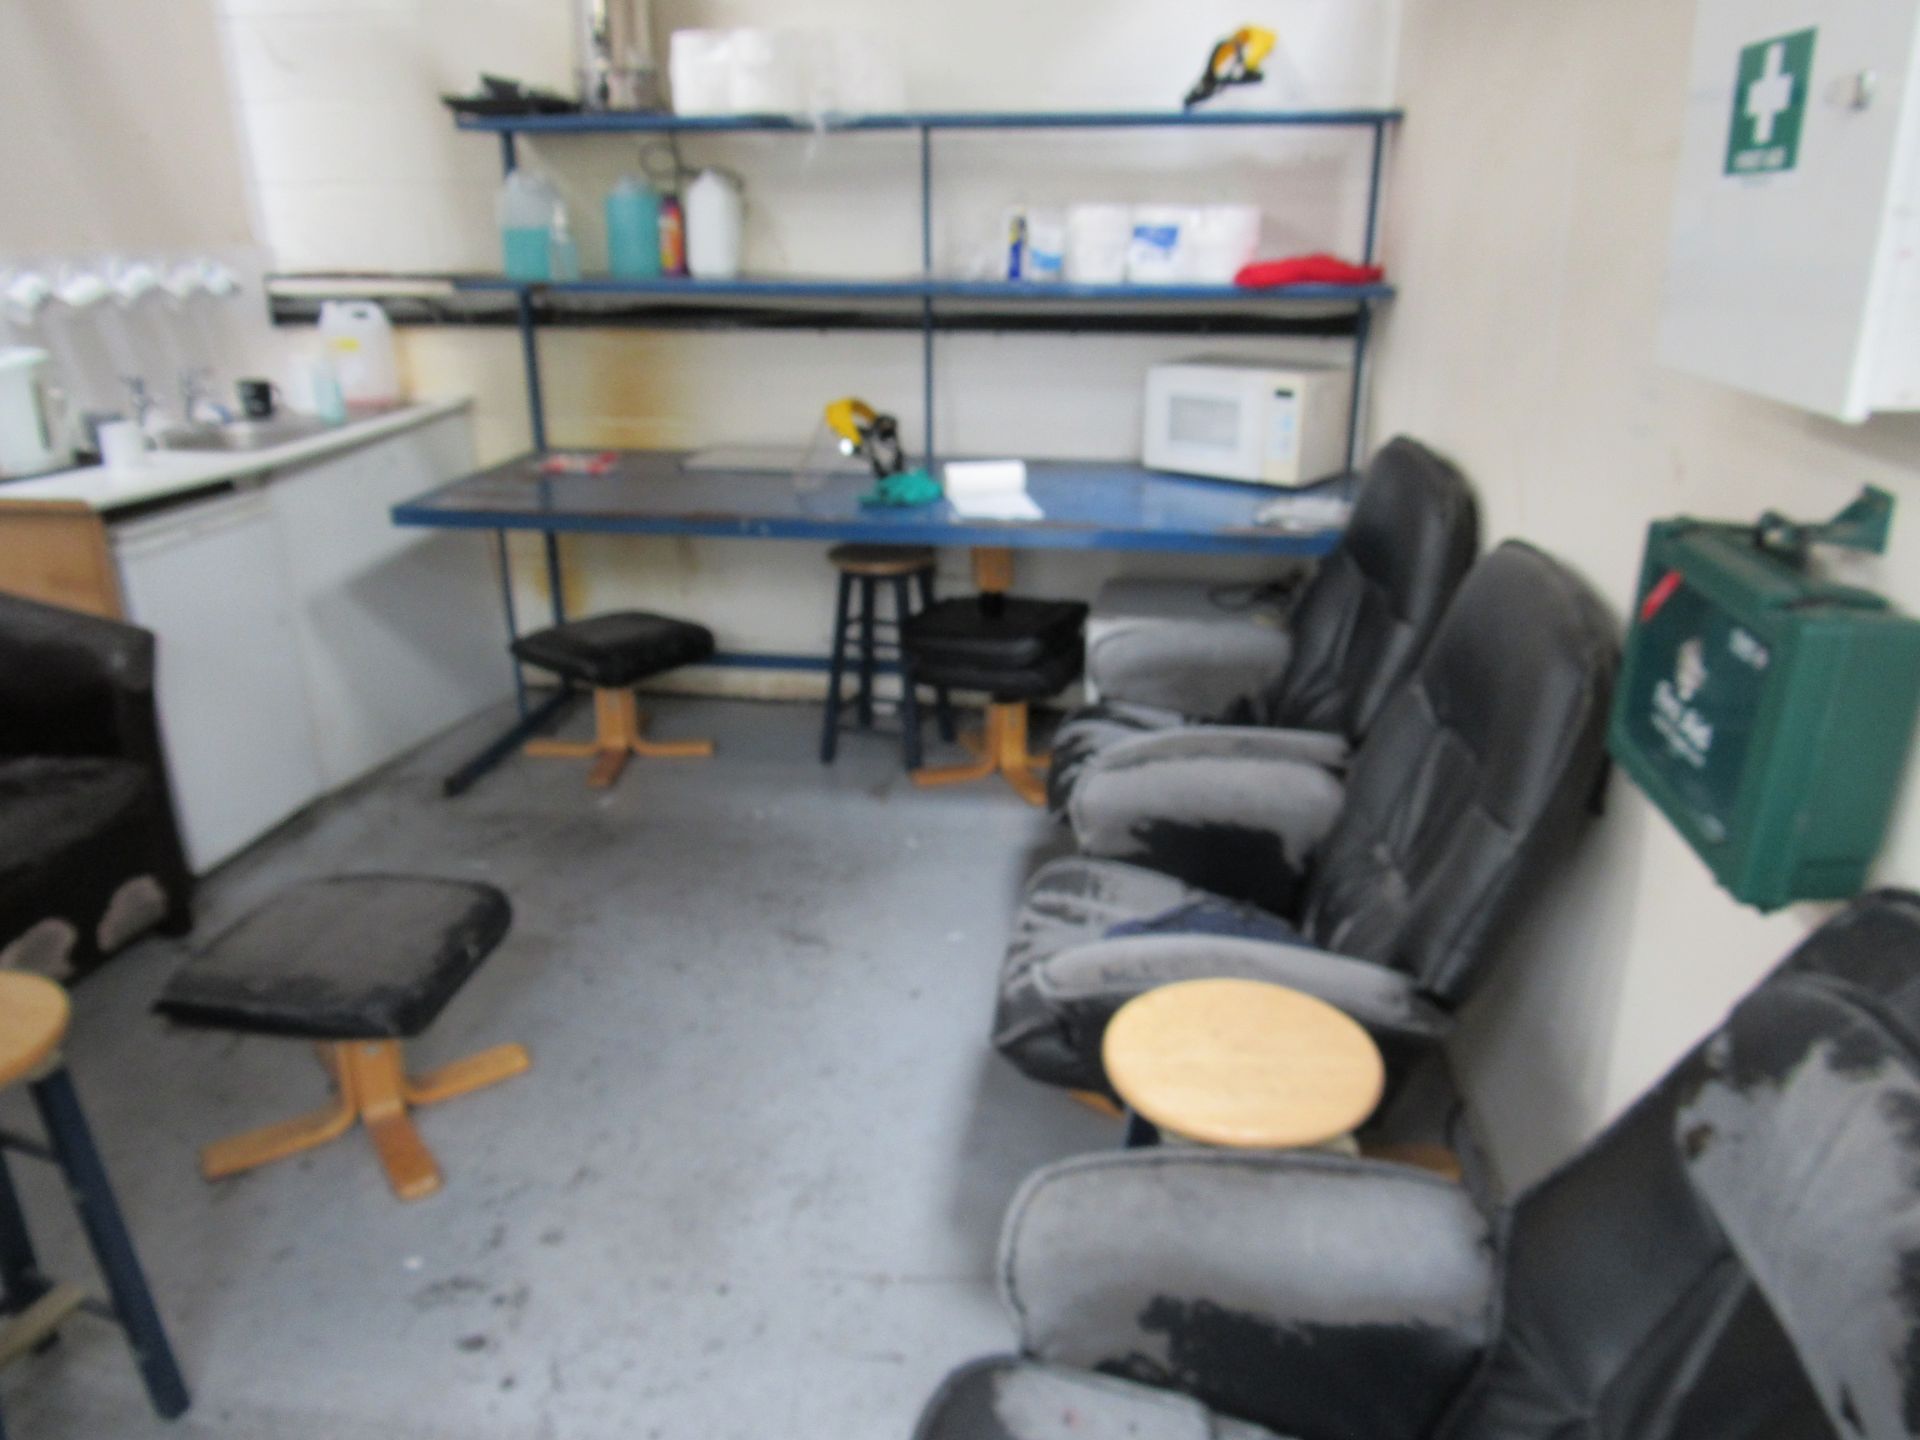 Contents to Canteen area (sink not included) - Image 2 of 3